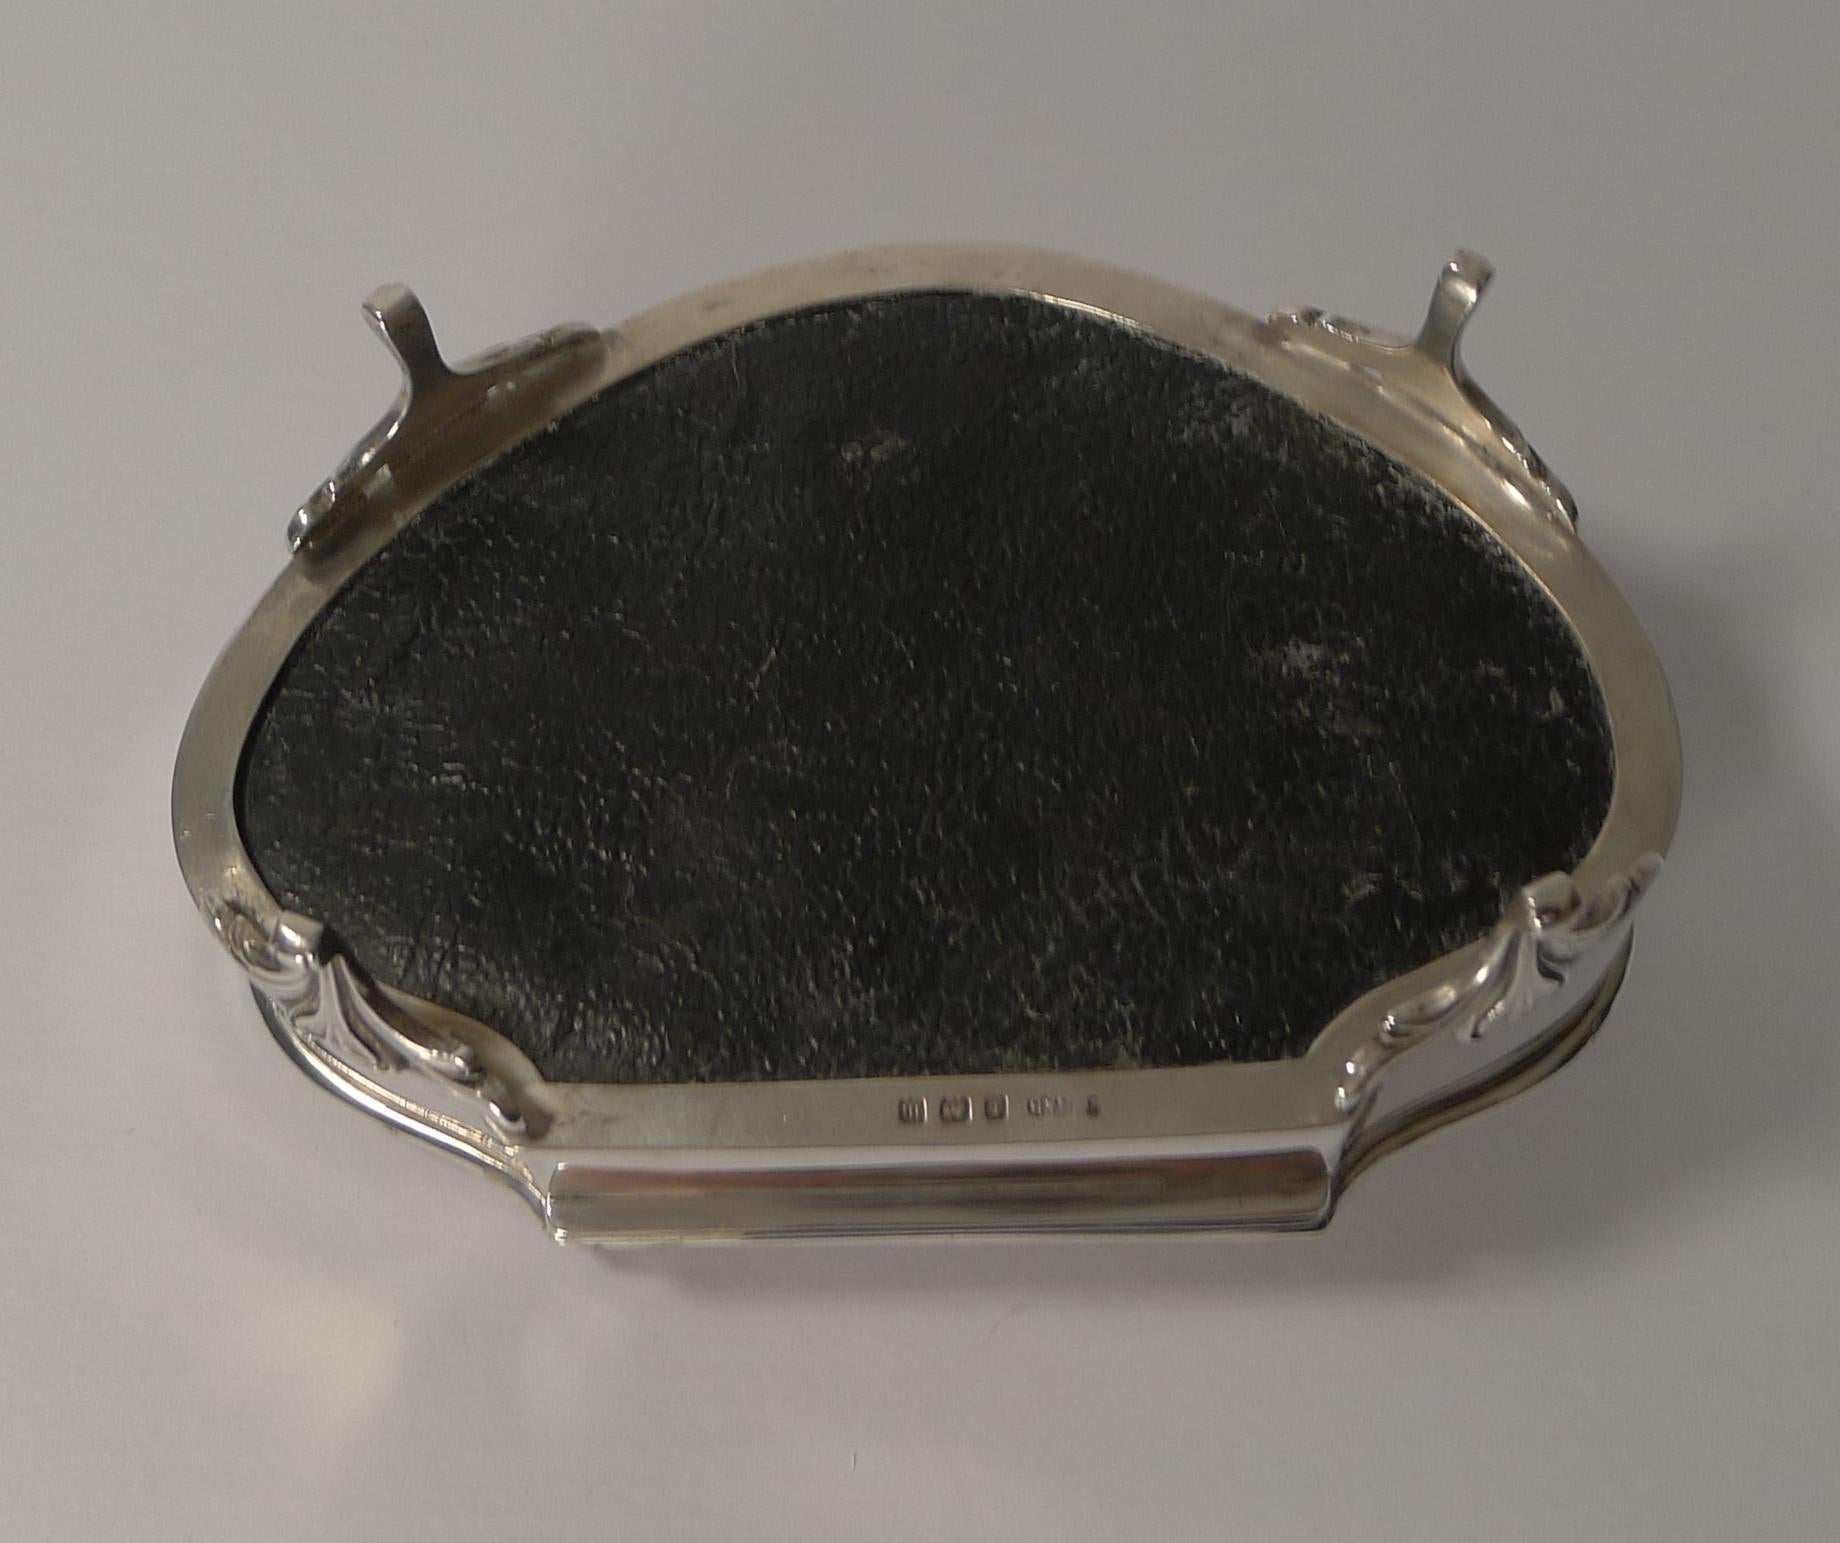 A beautiful heavy jewelry box made from English sterling silver standing on four stunning legs.

A superb shape is highlighted by a raised border surrounding a guilloche / engine turned decoration splaying out from the central circular cartouche